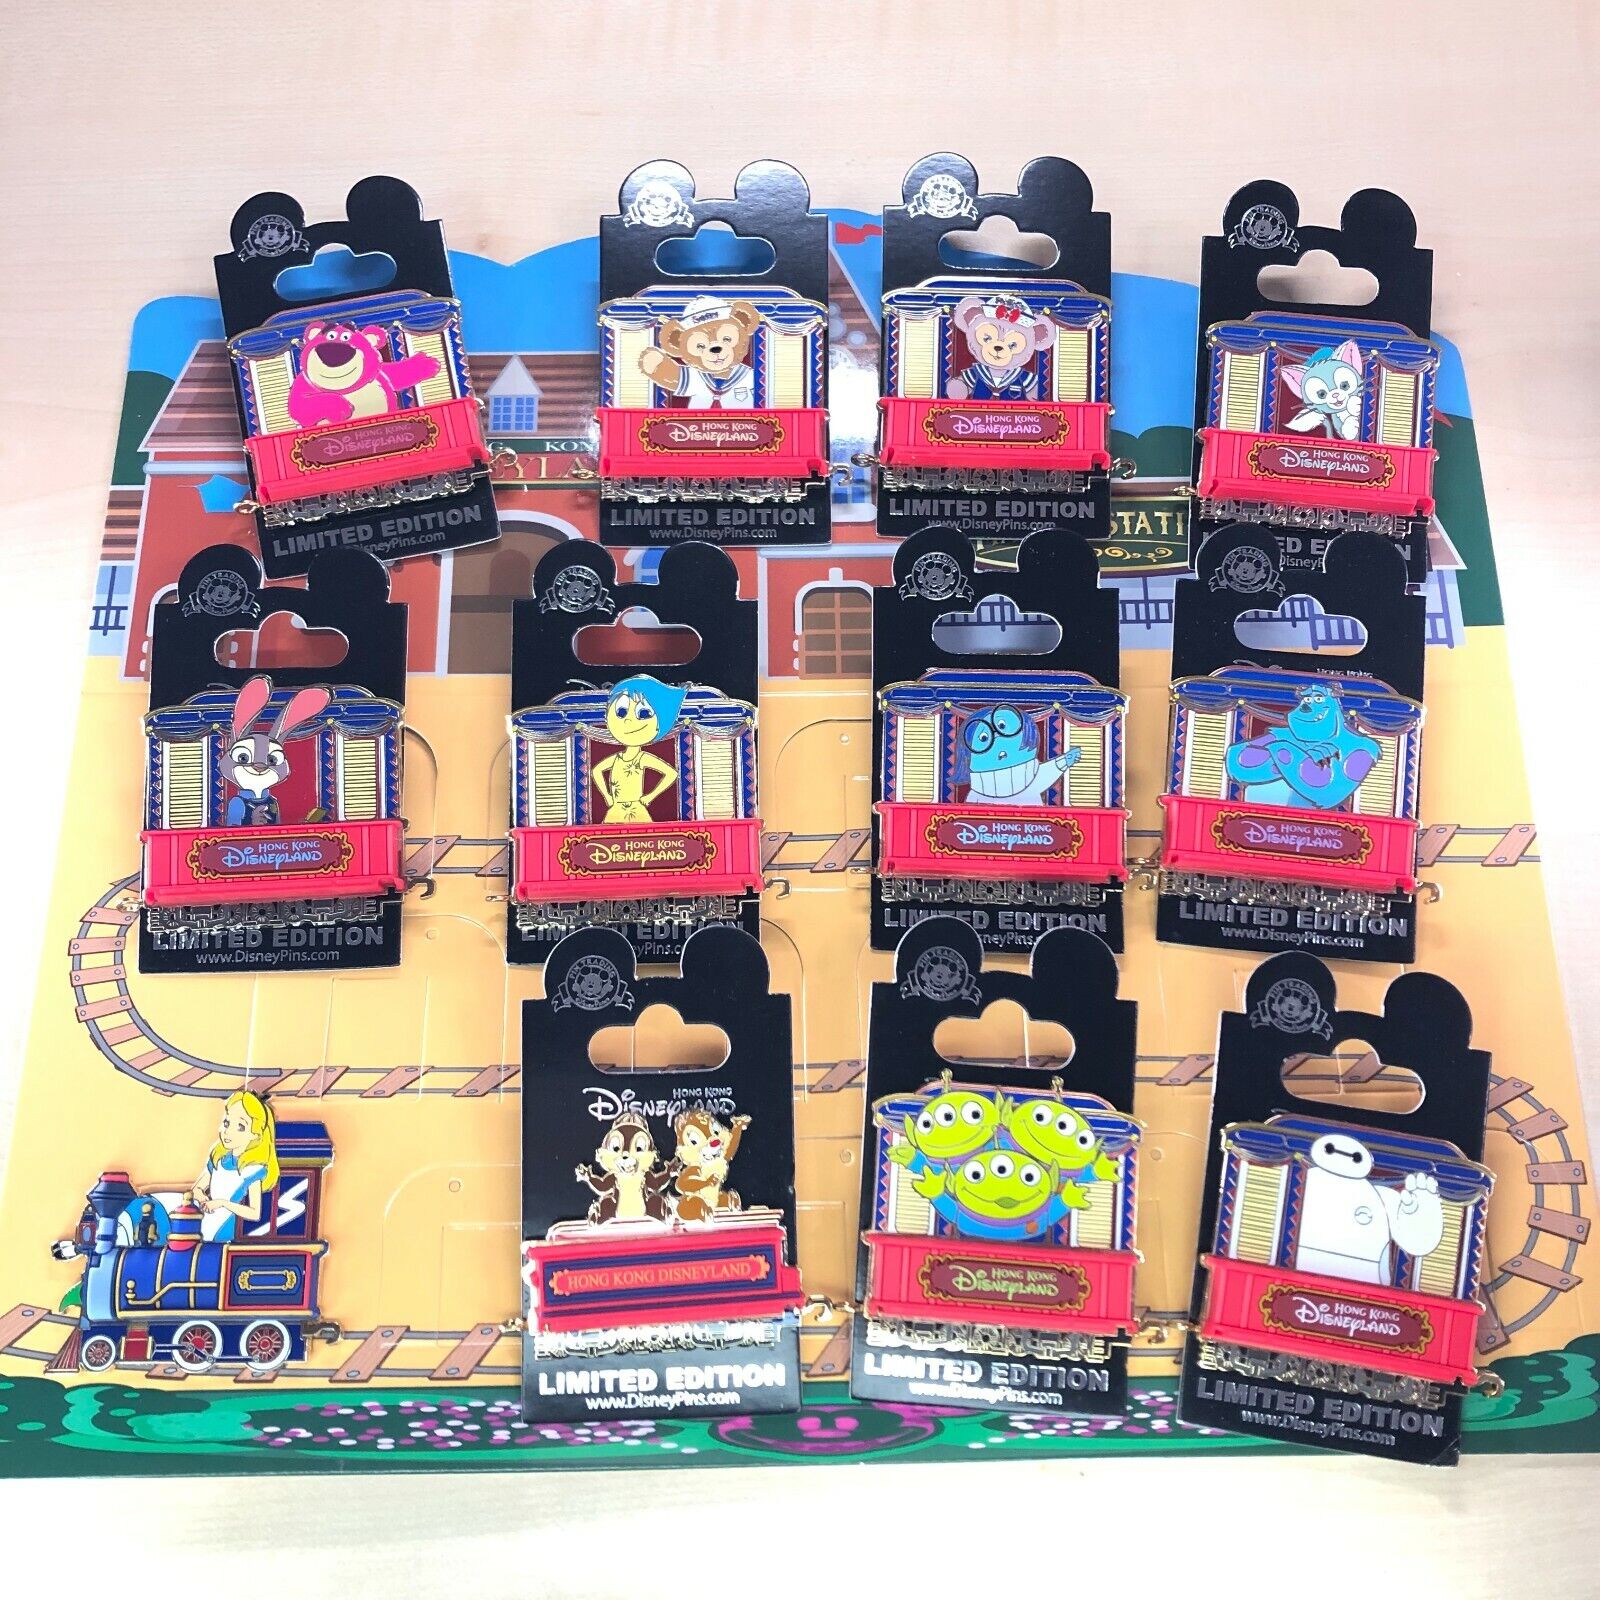 HKDL Train Series LE 300 pin set Zootopai Toystory Alice InsideOut Baymax CnD